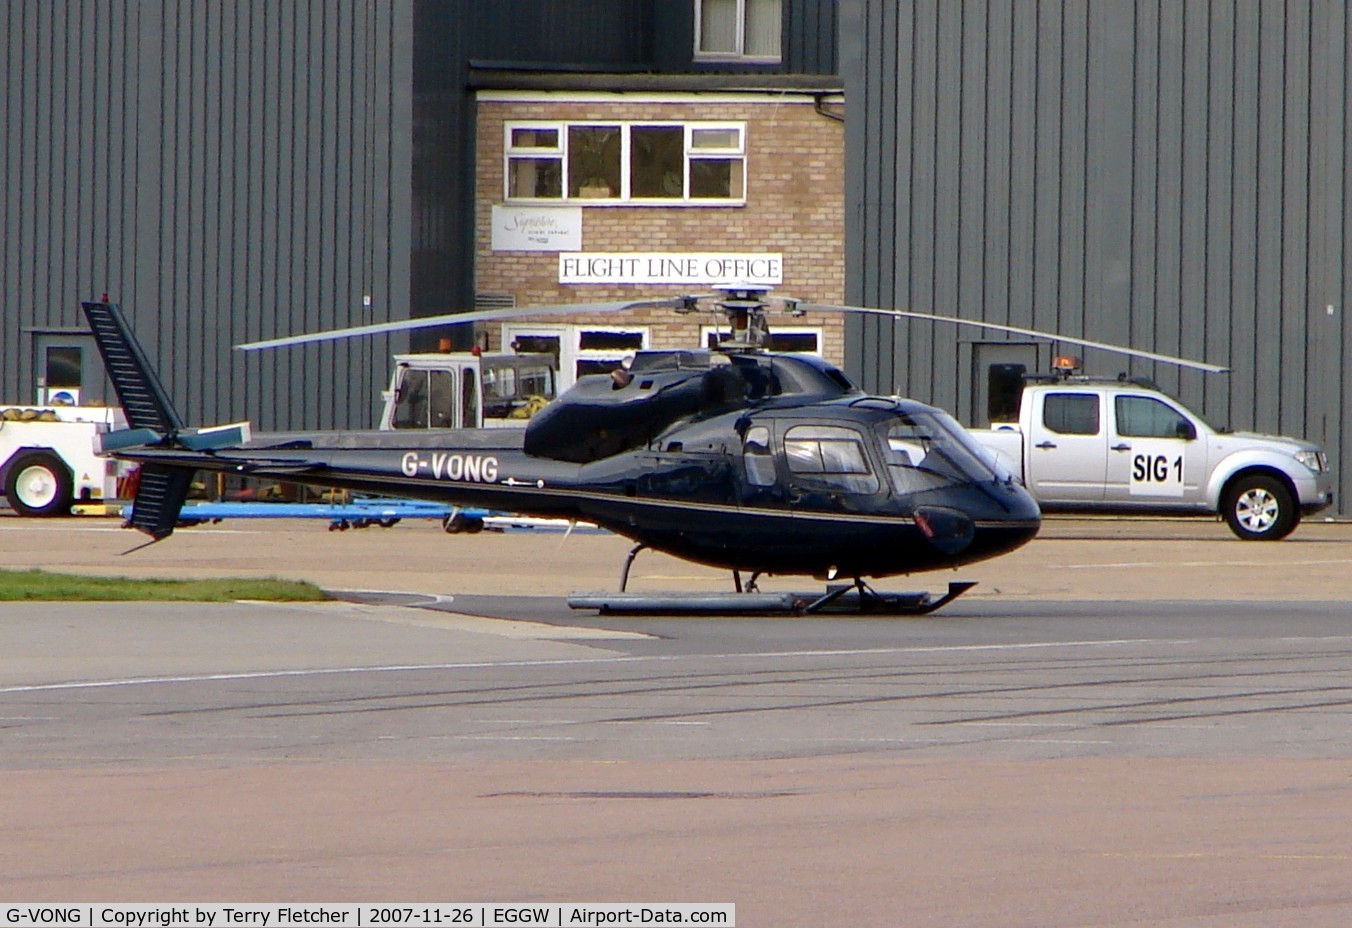 G-VONG, 1985 Aerospatiale AS-355F-1 Twin Ecureuil C/N 5327, This helicopter uses callsign 'Premier 18'